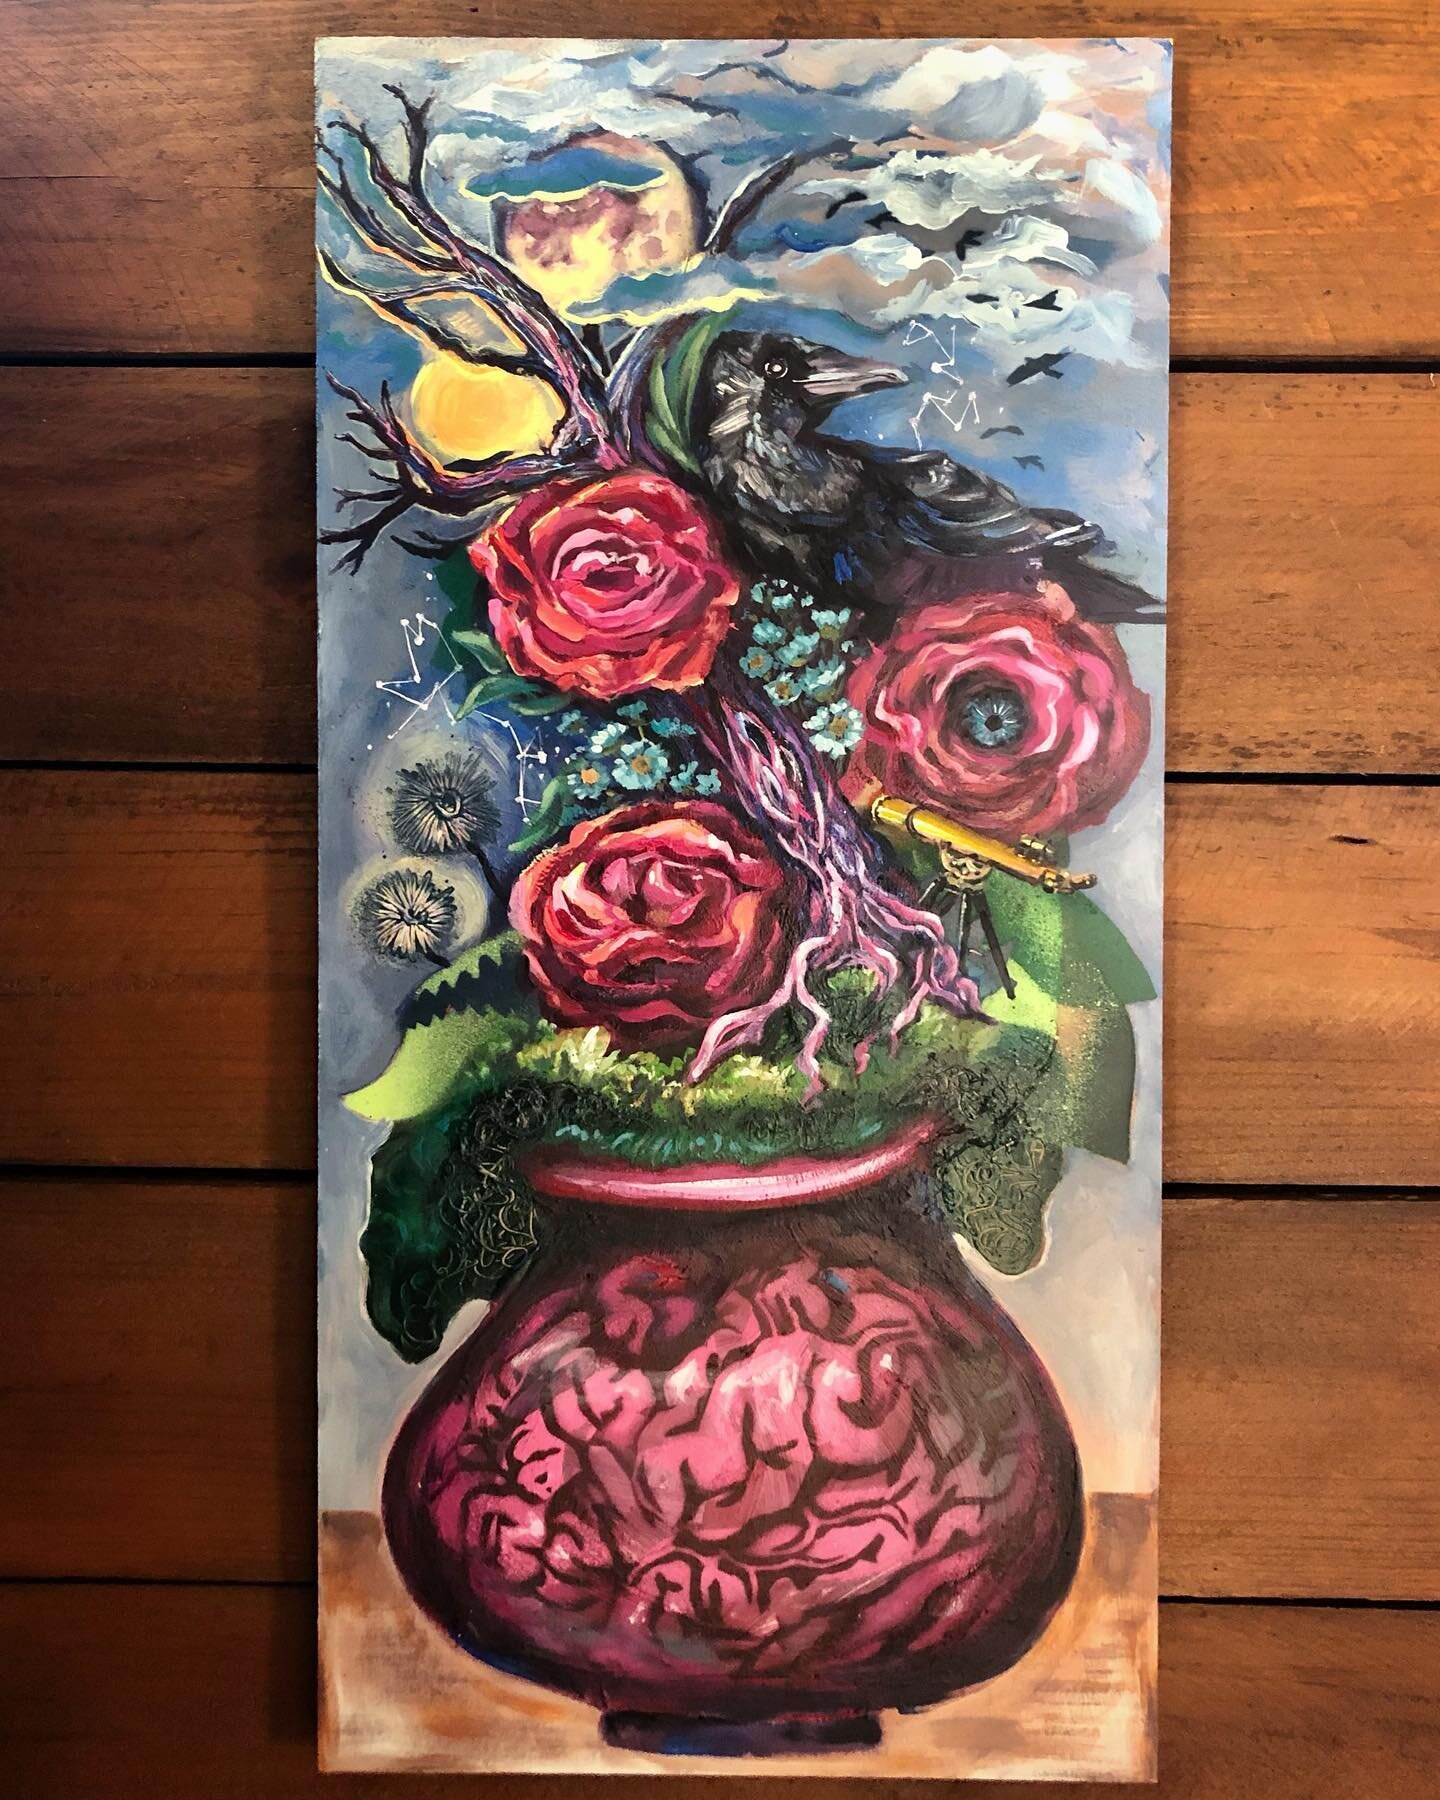 Tried out a surreal approach to the bouquets, for a Crow themed show. It&rsquo;s a start.

#crow #abstractarrangement #roses #hiddeneye #telescope #constellation #brain #obscurity #themind